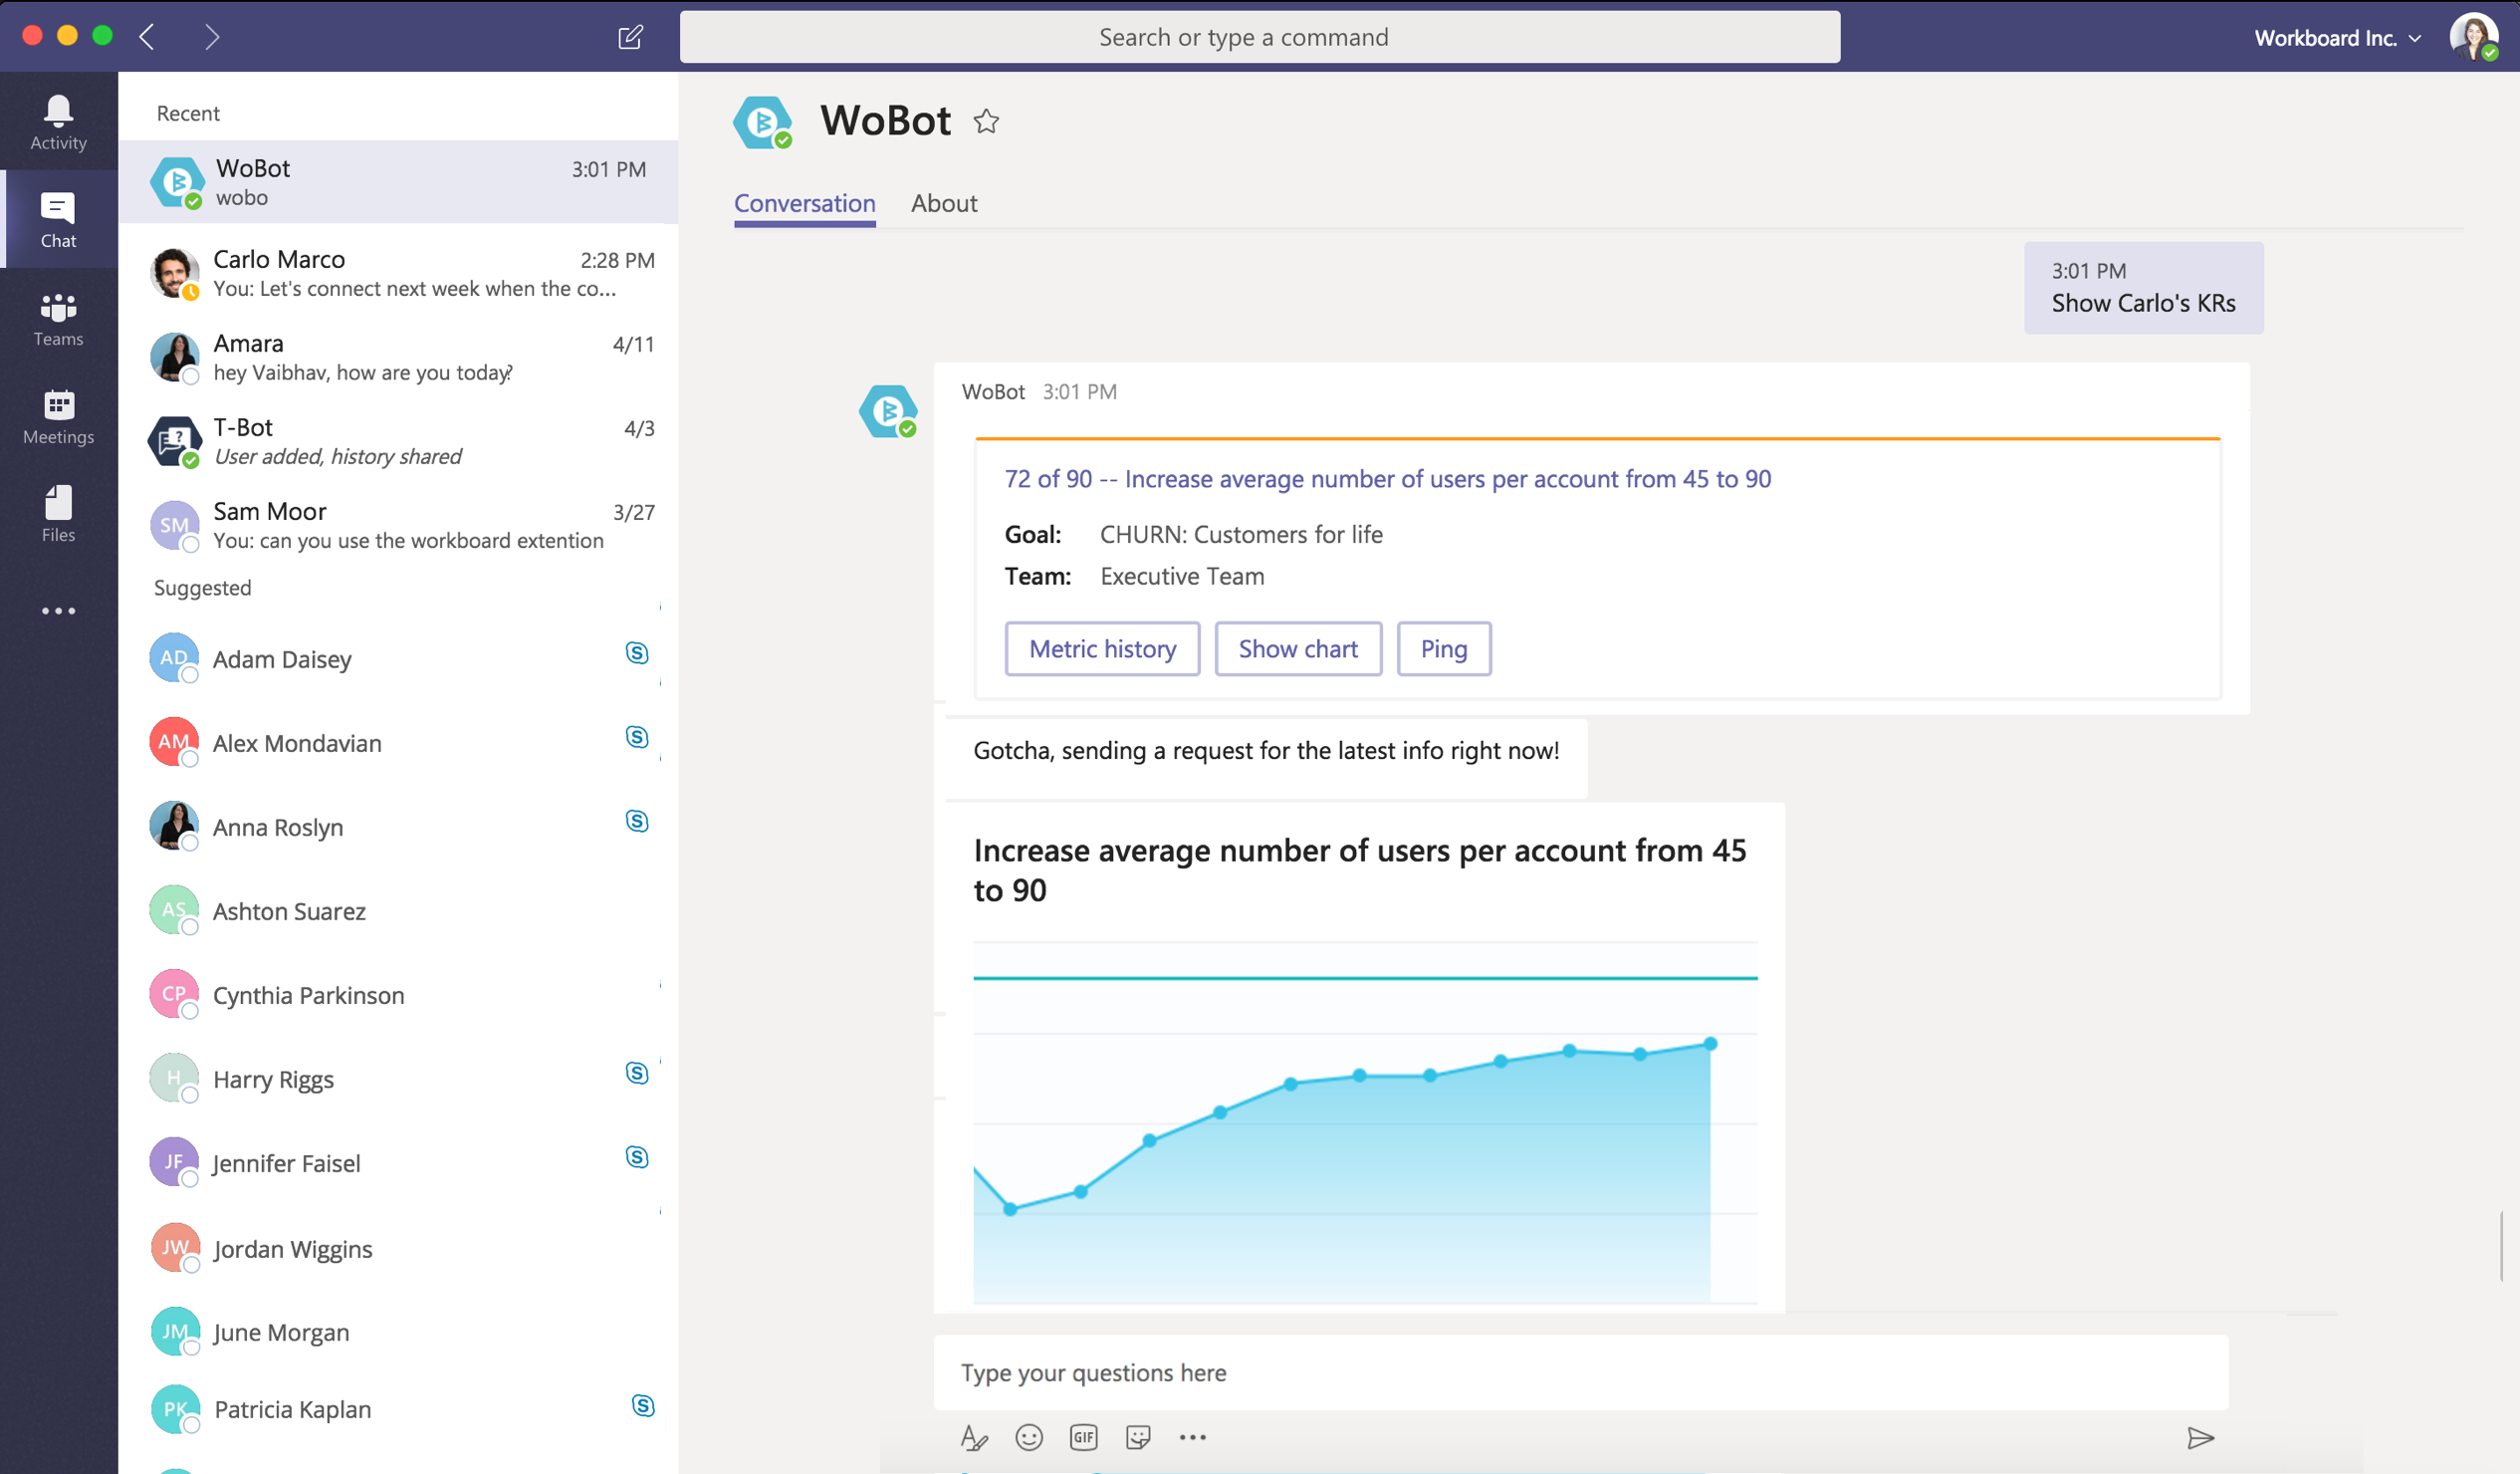 Use WoBot, an intelligent chatbot, to get and update business objectives